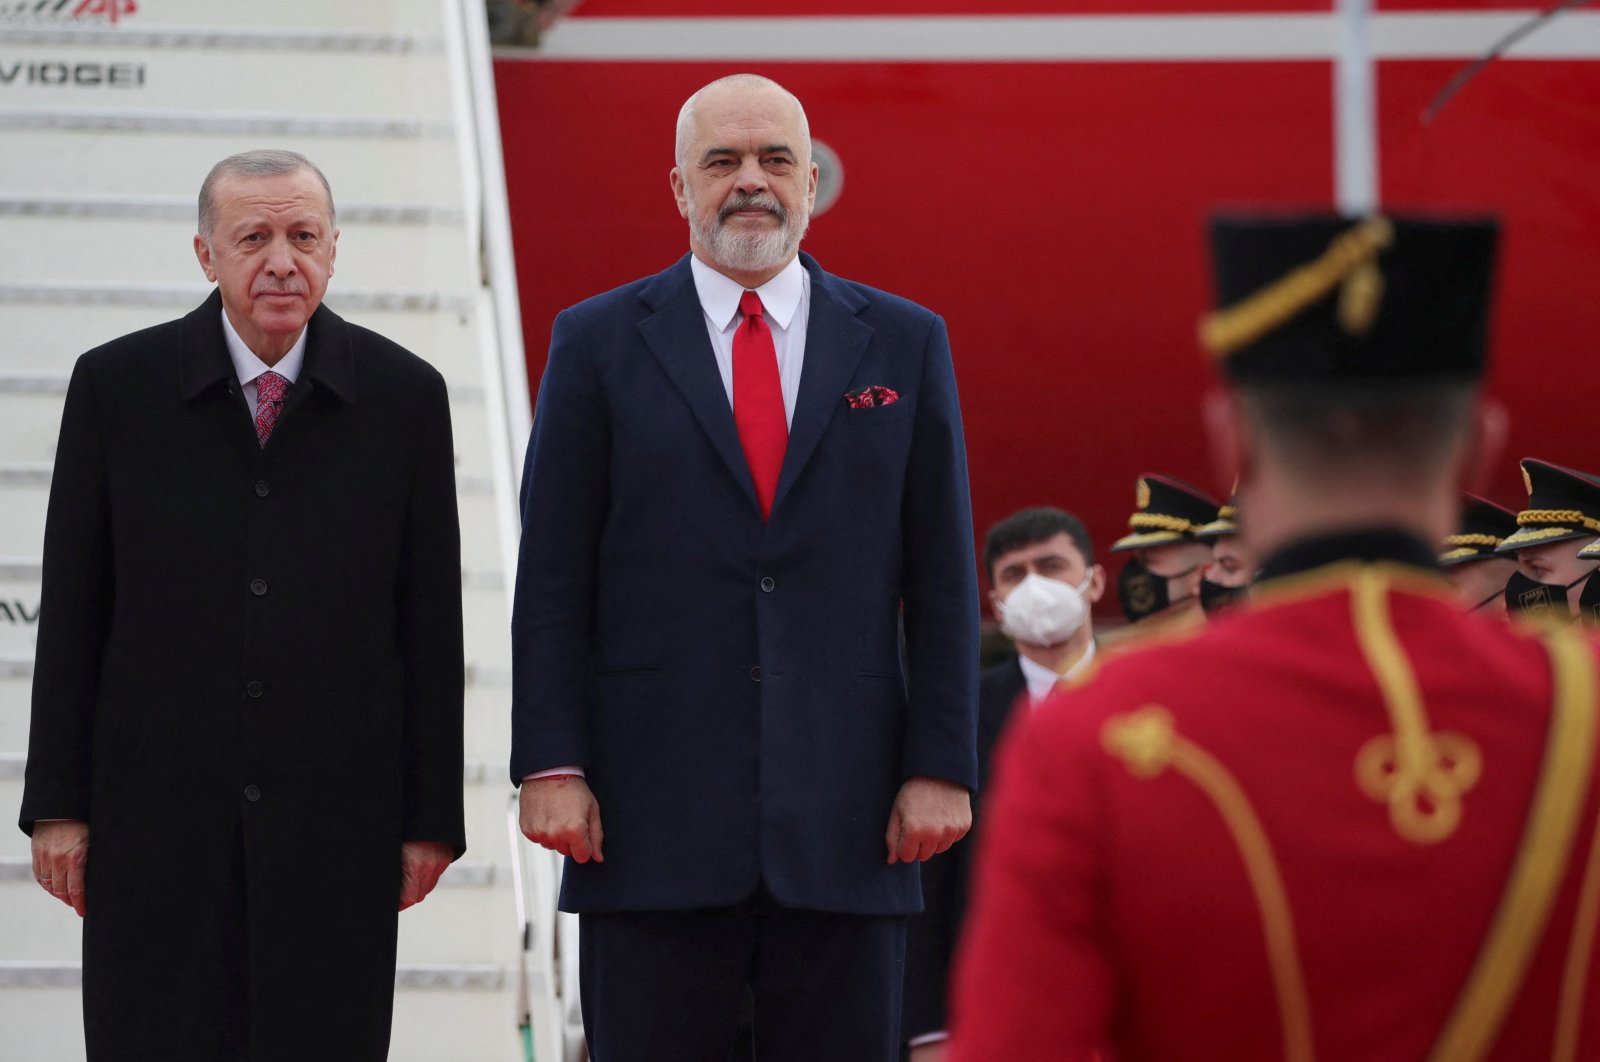 President Recep Tayyip Erdoğan is welcomed by Albanian Prime Minister Edi Rama at Tirana International Airport &quot;Mother Teresa&quot; during his one-day visit, in Tirana, Albania, Jan. 17, 2022. (Reuters Photo)